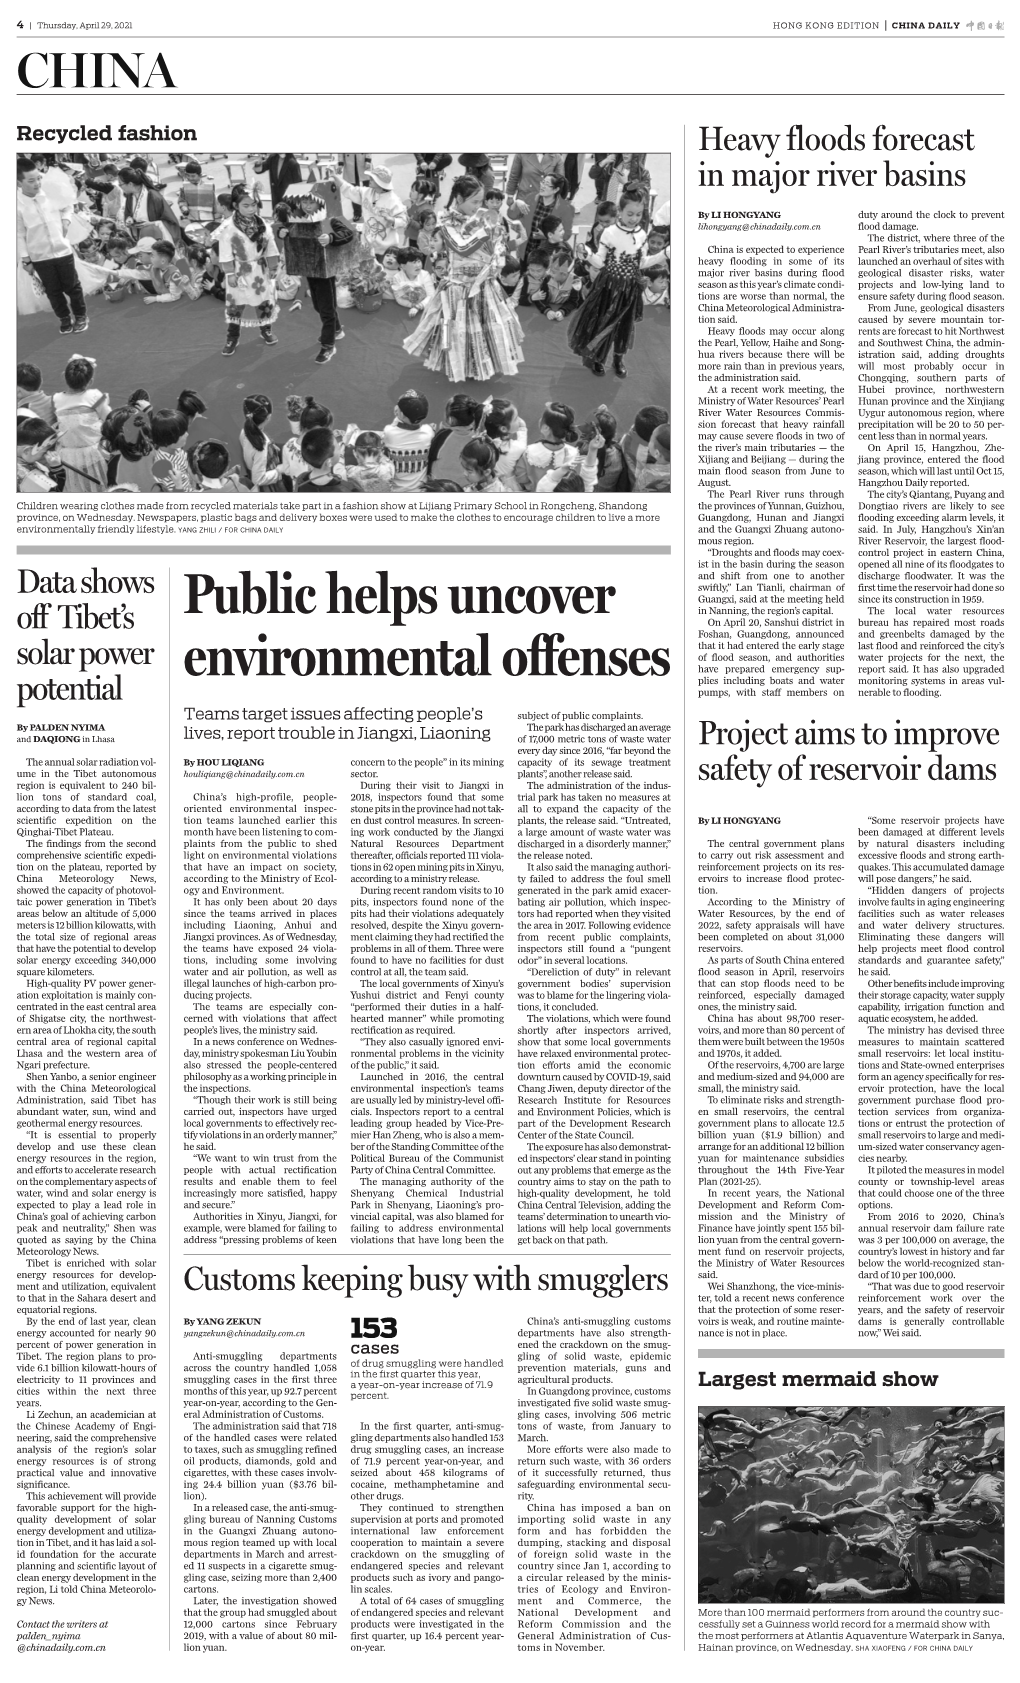 Public Helps Uncover Environmental Offenses